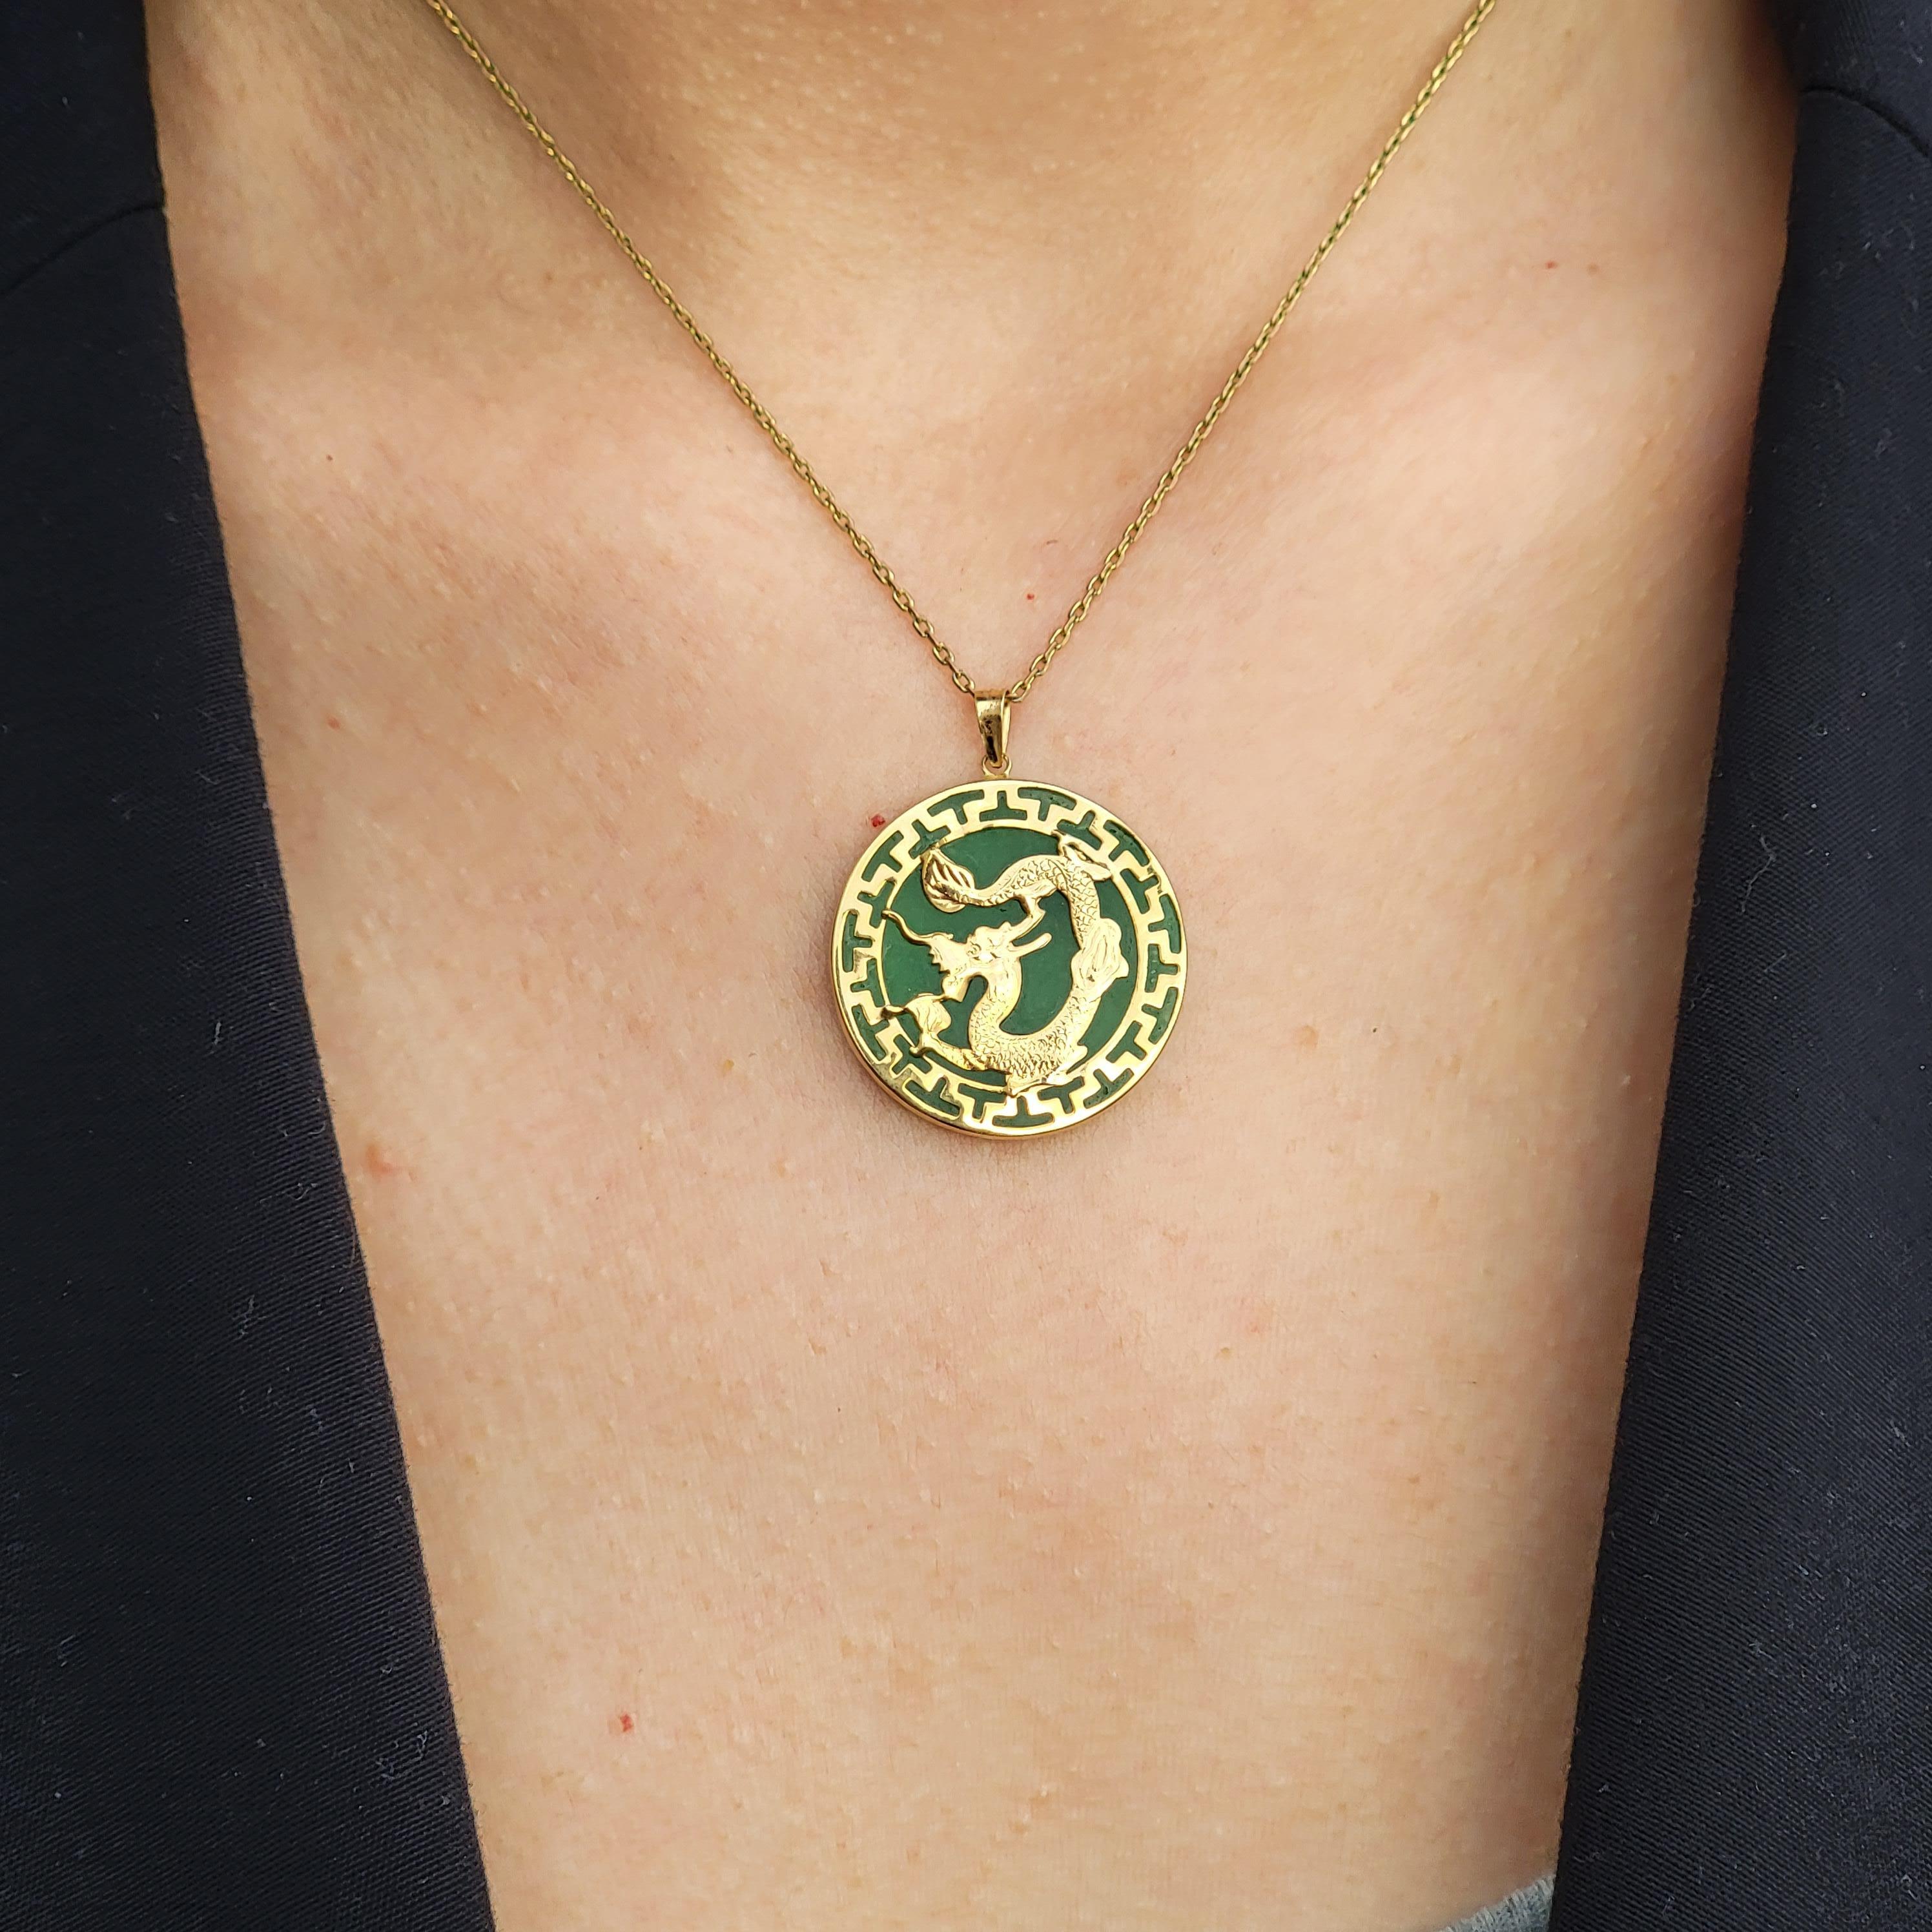 The 'Kowloon Jade Dragon Pendant' represents Hong Kong's 'Nine Dragons' Peninsula. The all powerful and decisive Dragon is quintessentially Oriental. The Gold Dragon contoured on Jade shines through.

The opacity and translucency of the materials